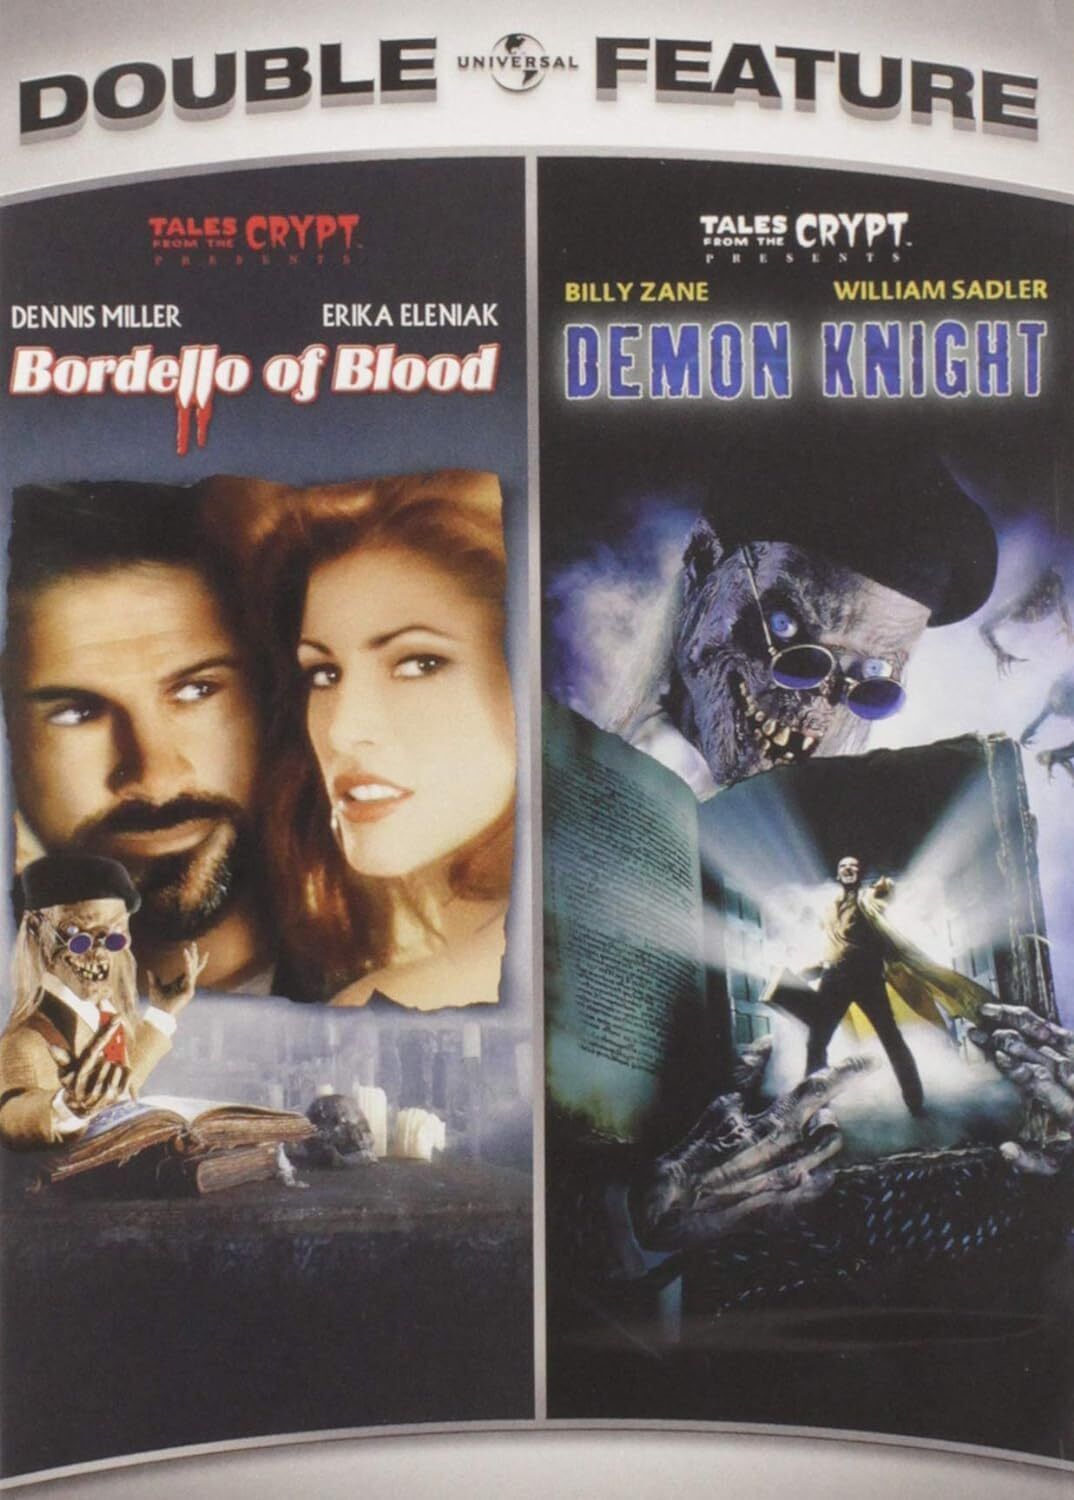 Tales from the Crypt: (Bordello of Blood / Tales from the Crypt: Demon Knight)